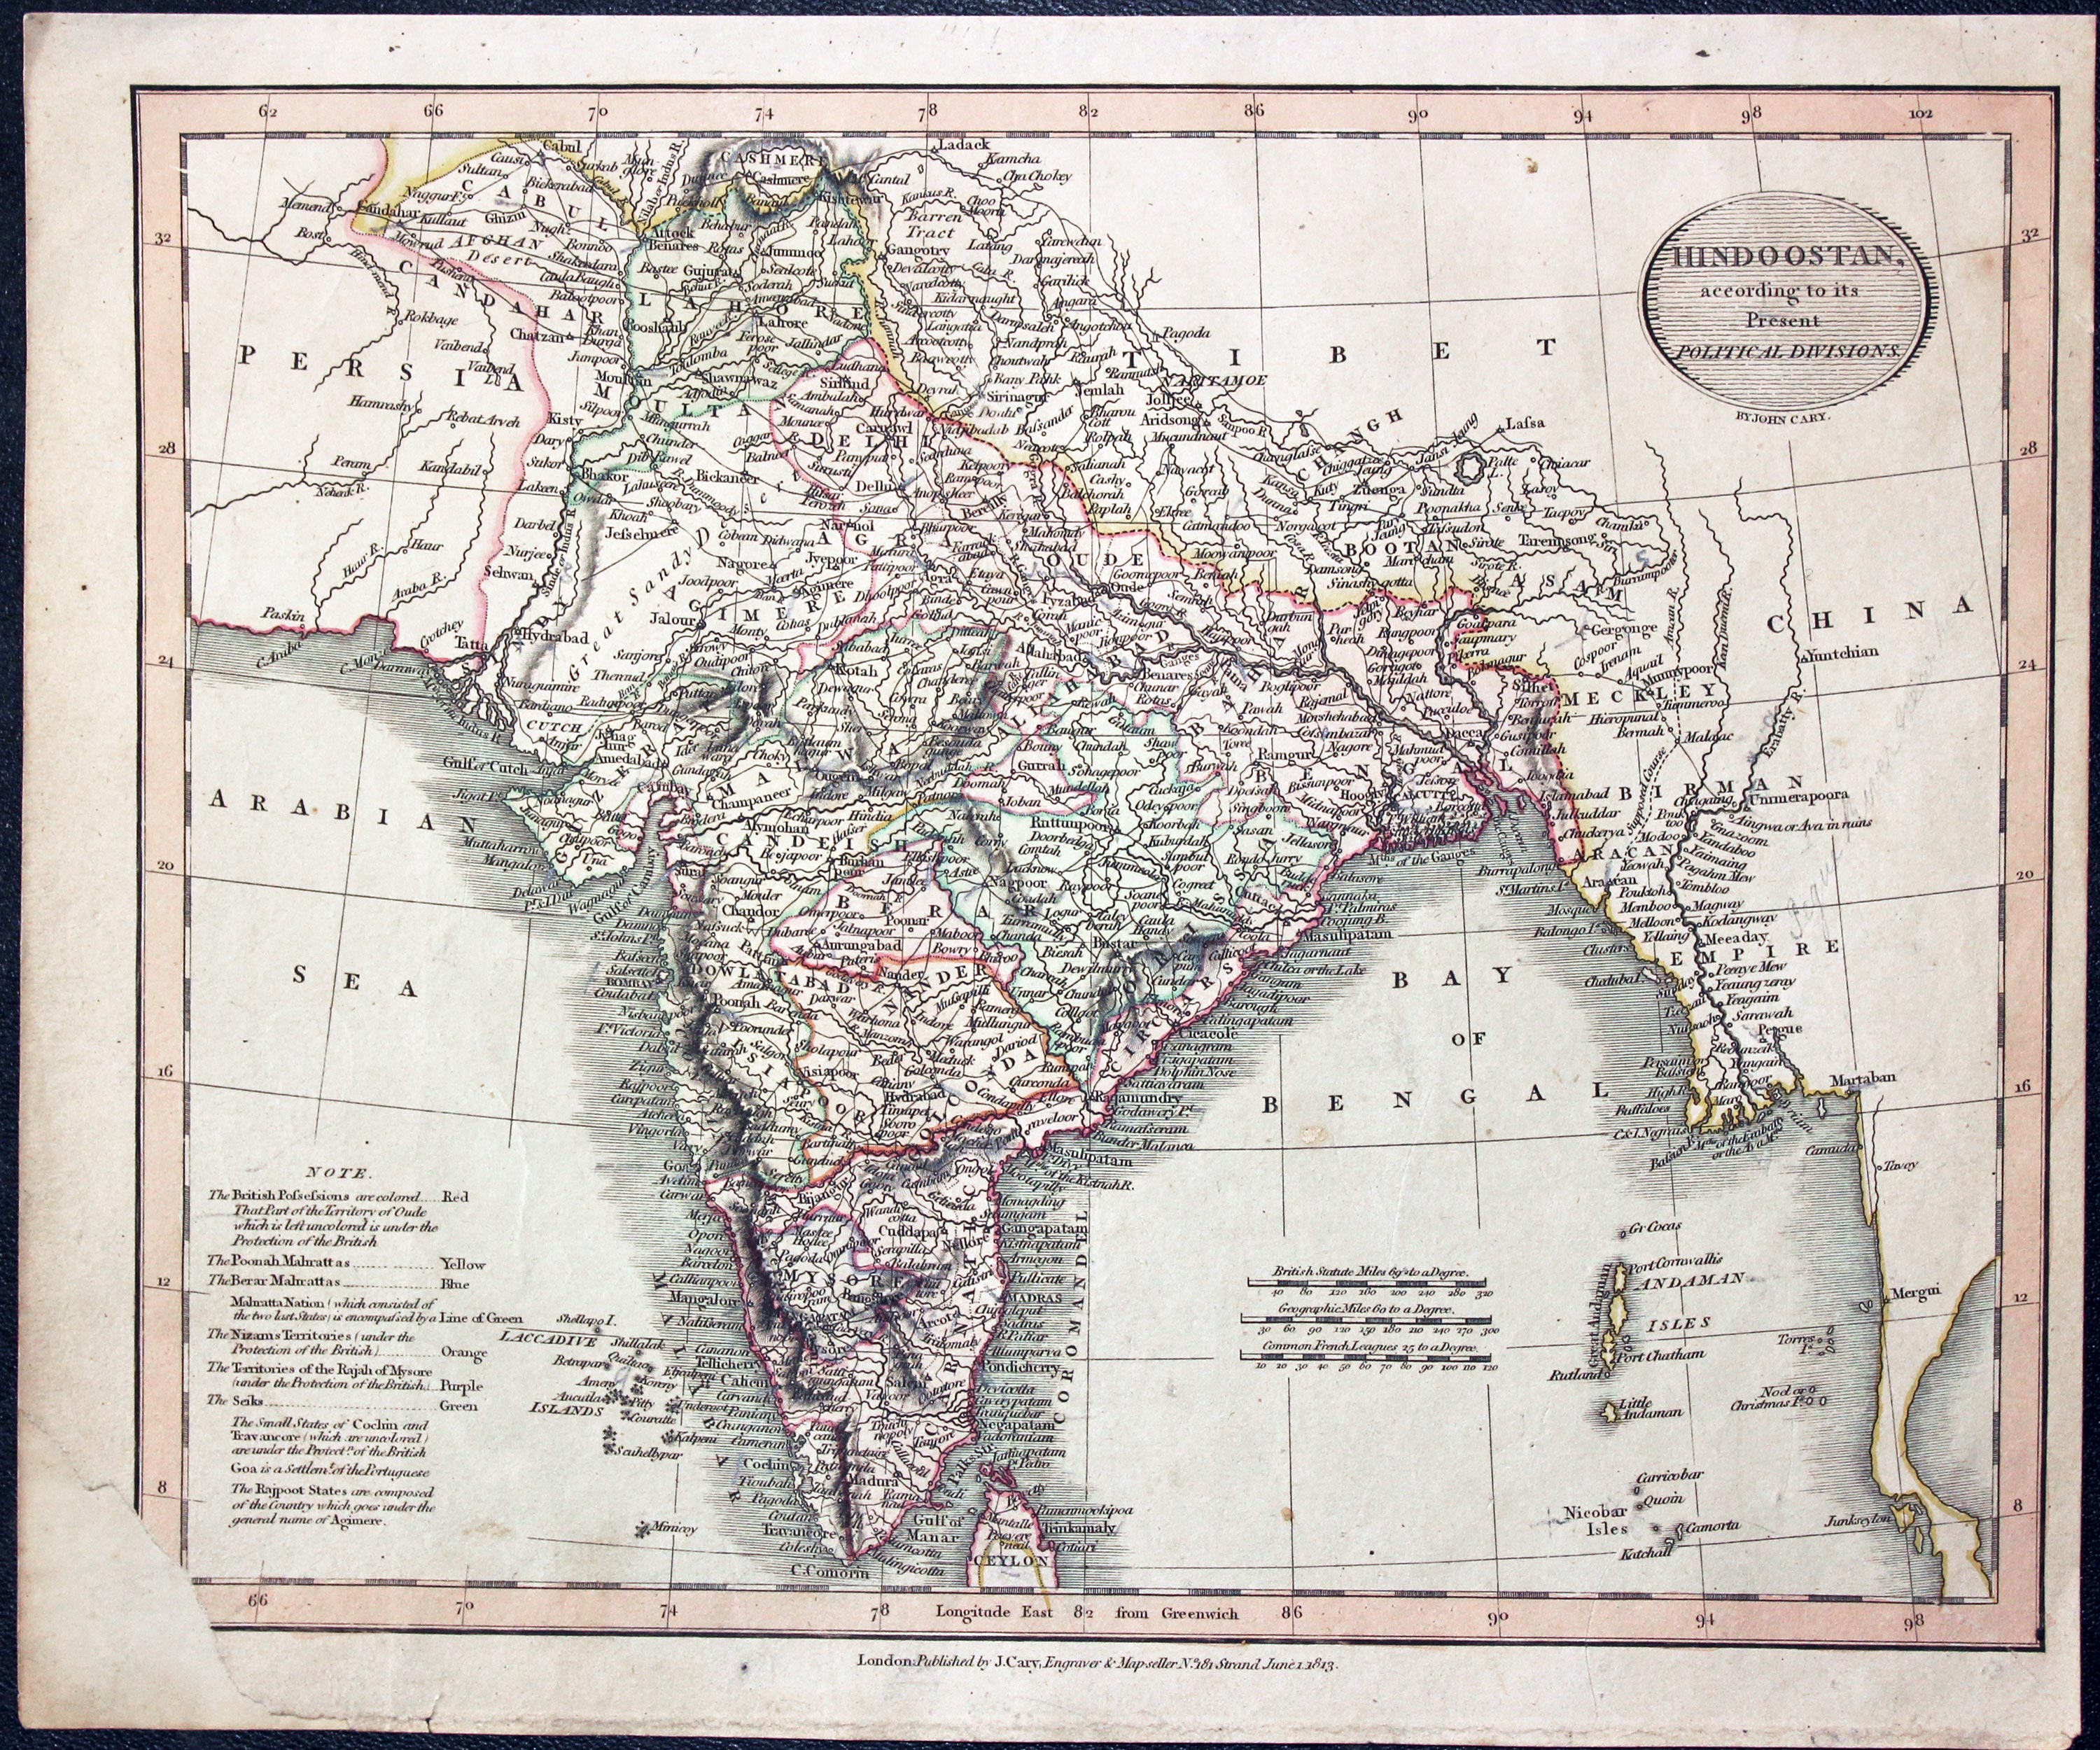 Antique Maps of India - Richard Nicholson of Chester